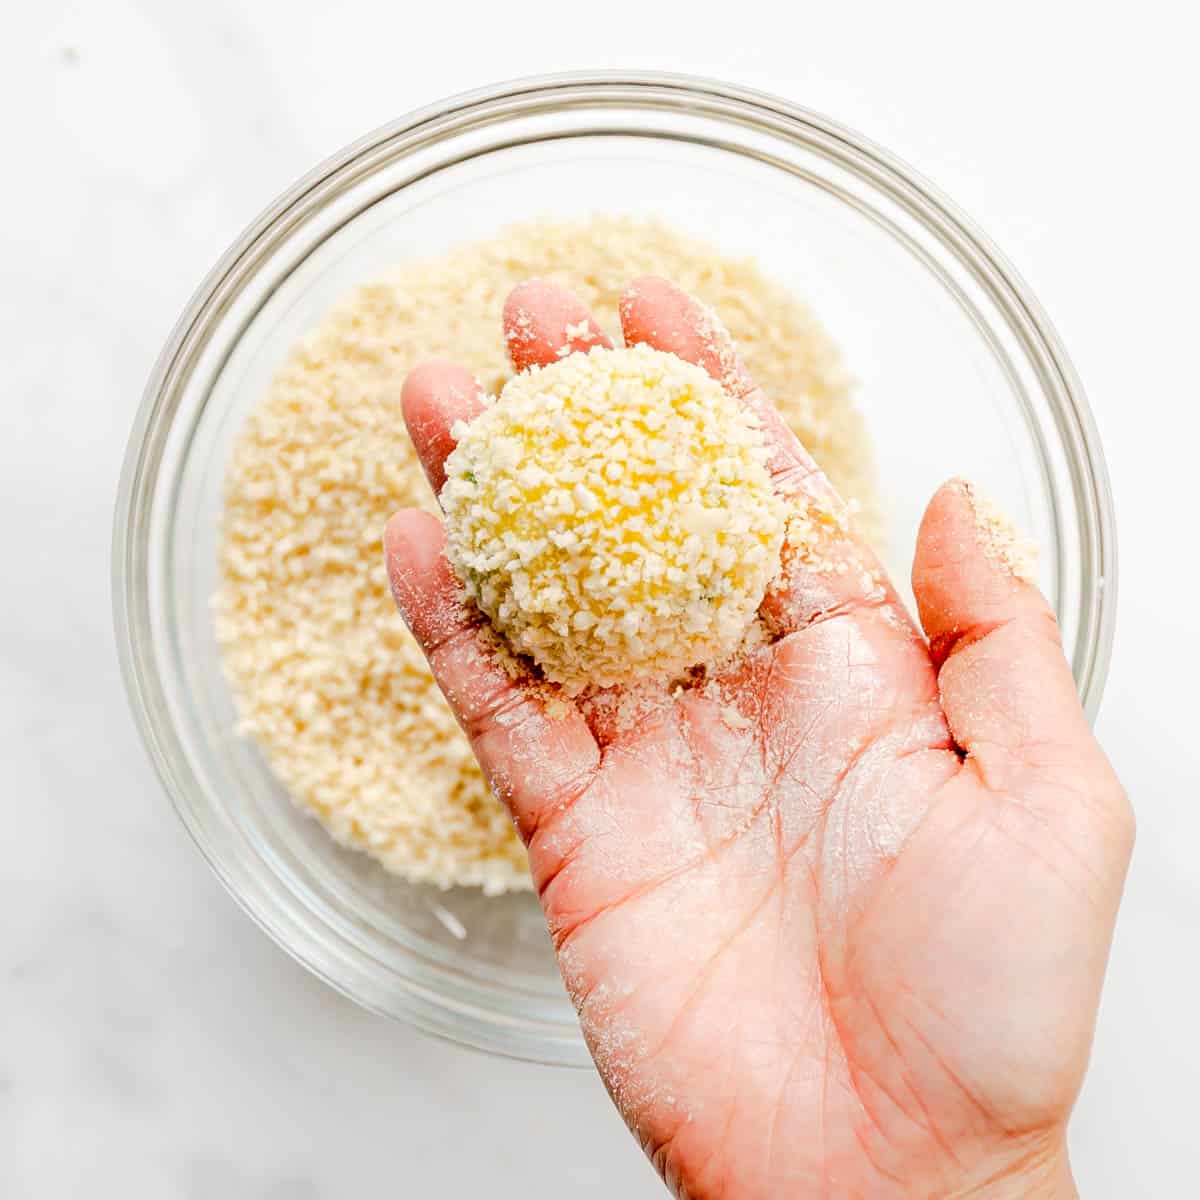 Coat the potato balls with panko breadcrumbs then (you guessed it), gently shake off excess. 